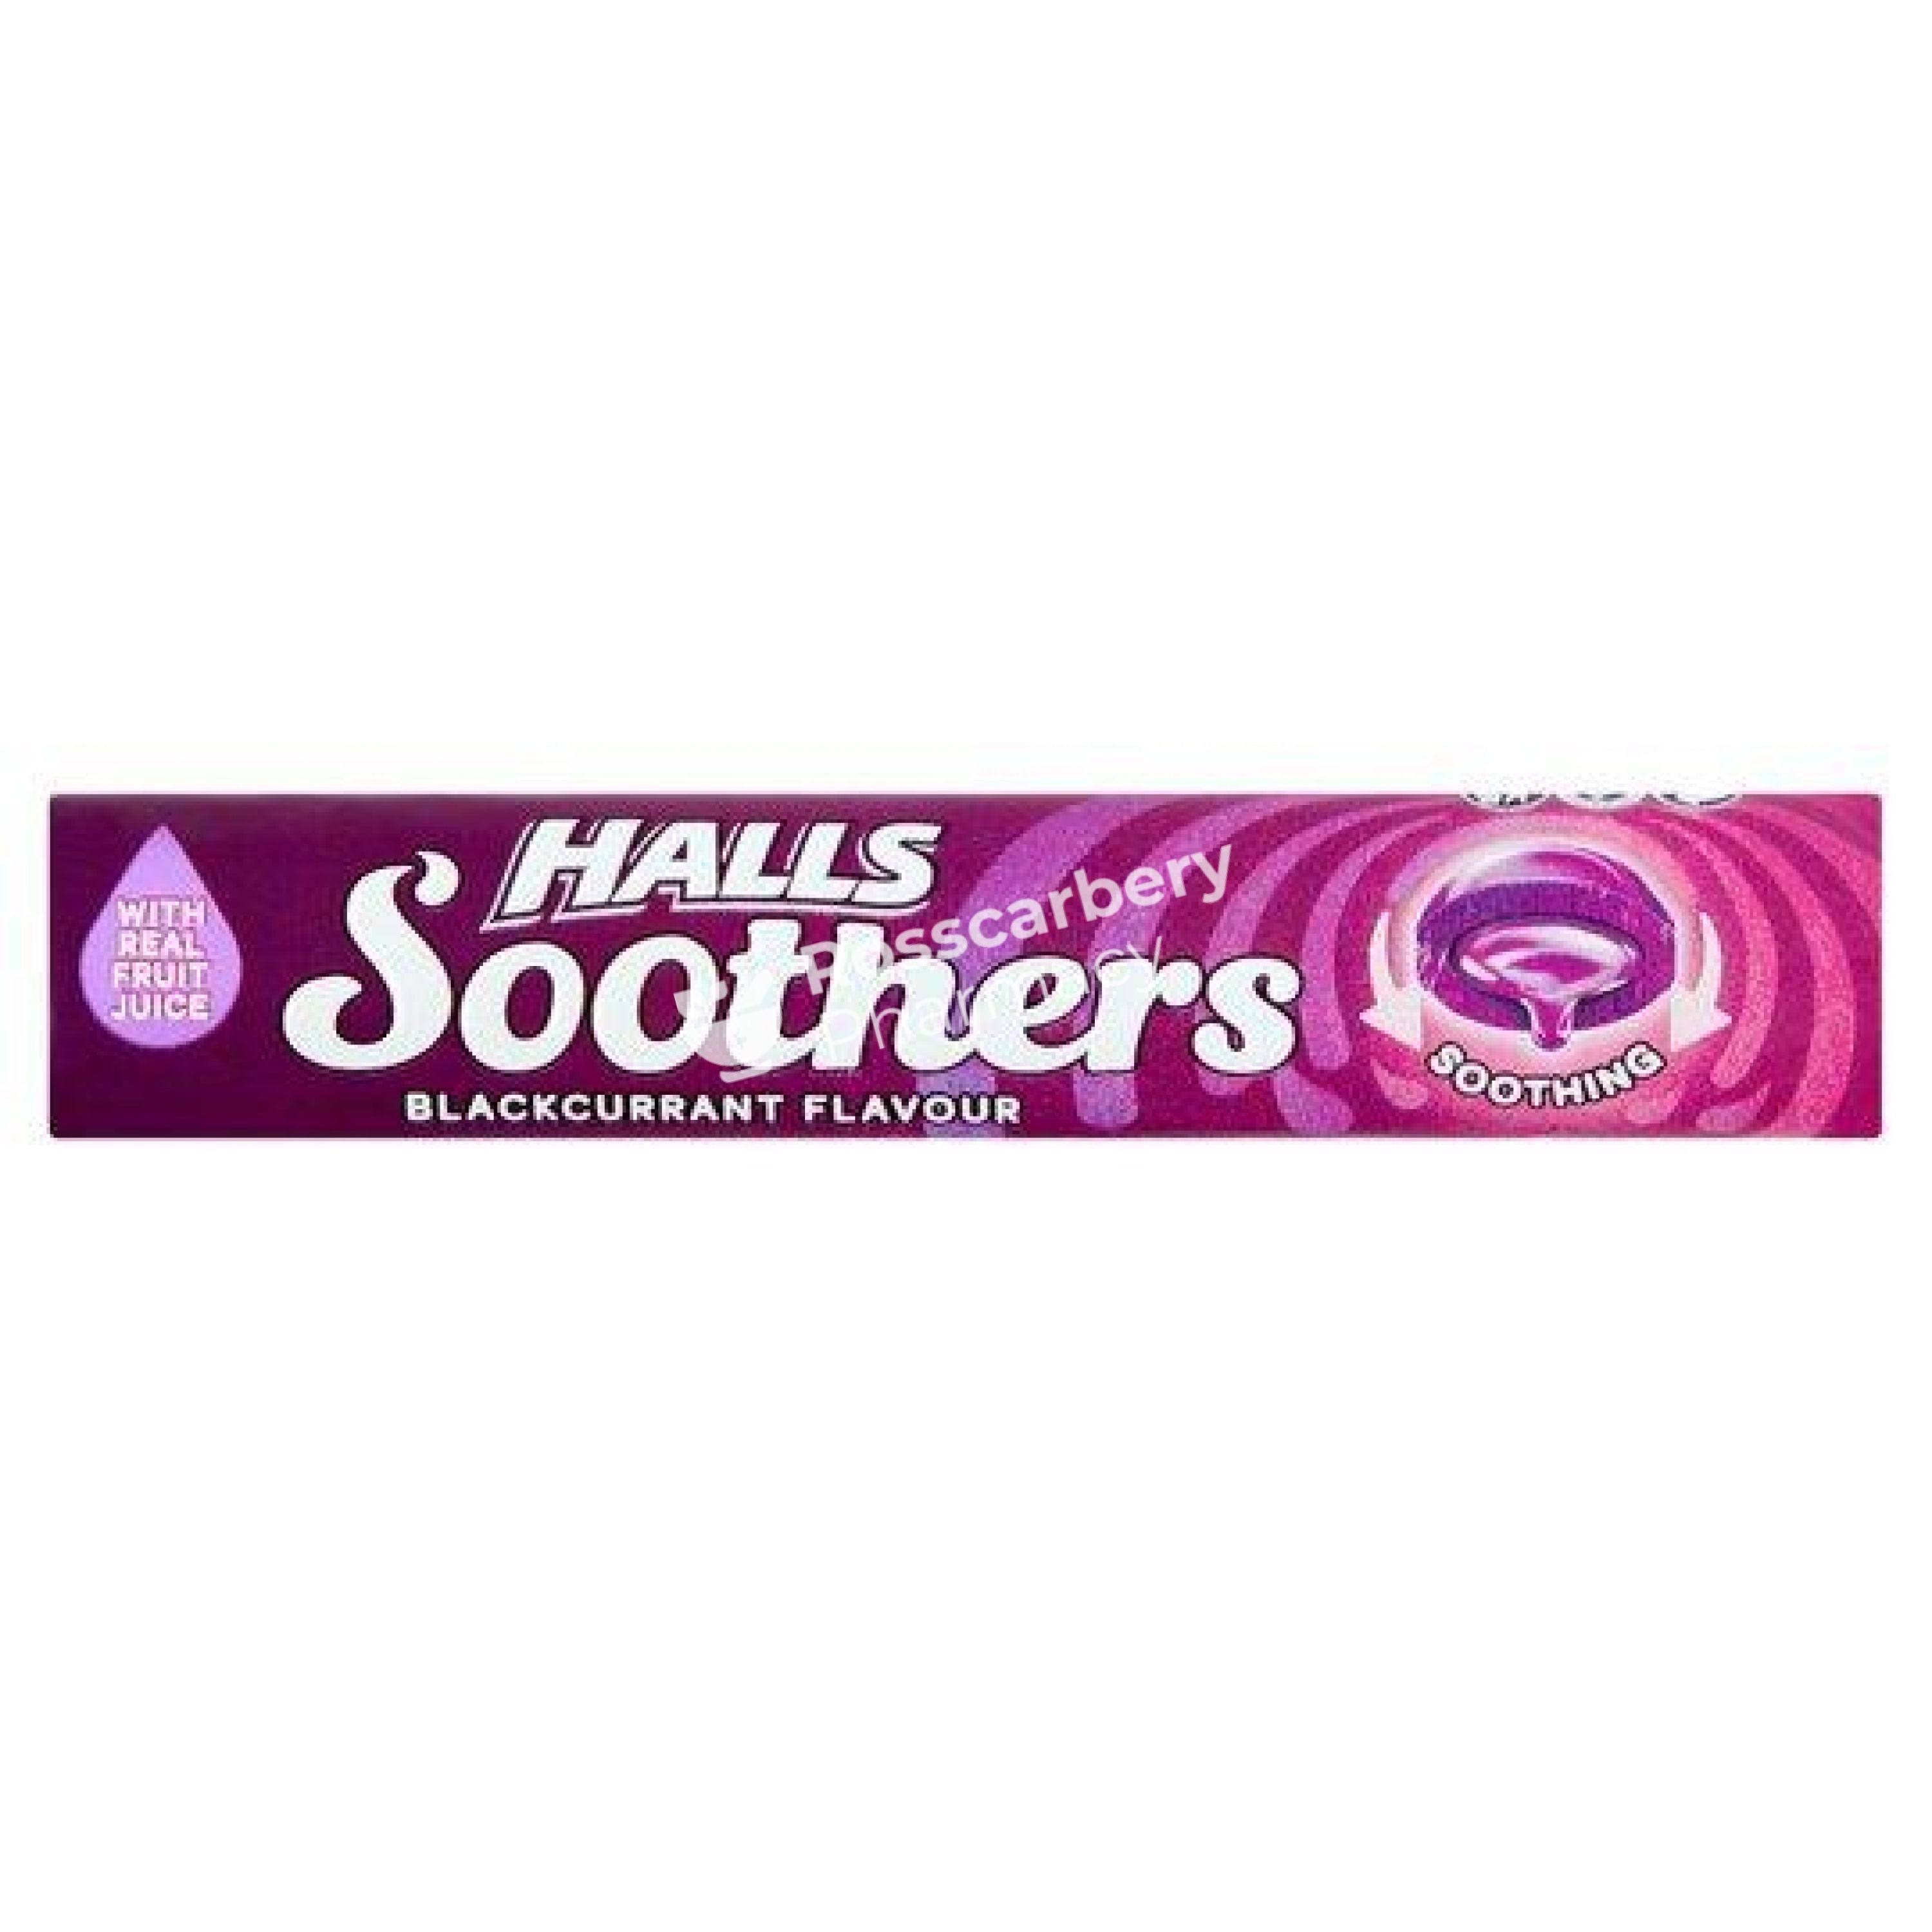 Halls Soothers - Blackcurrant